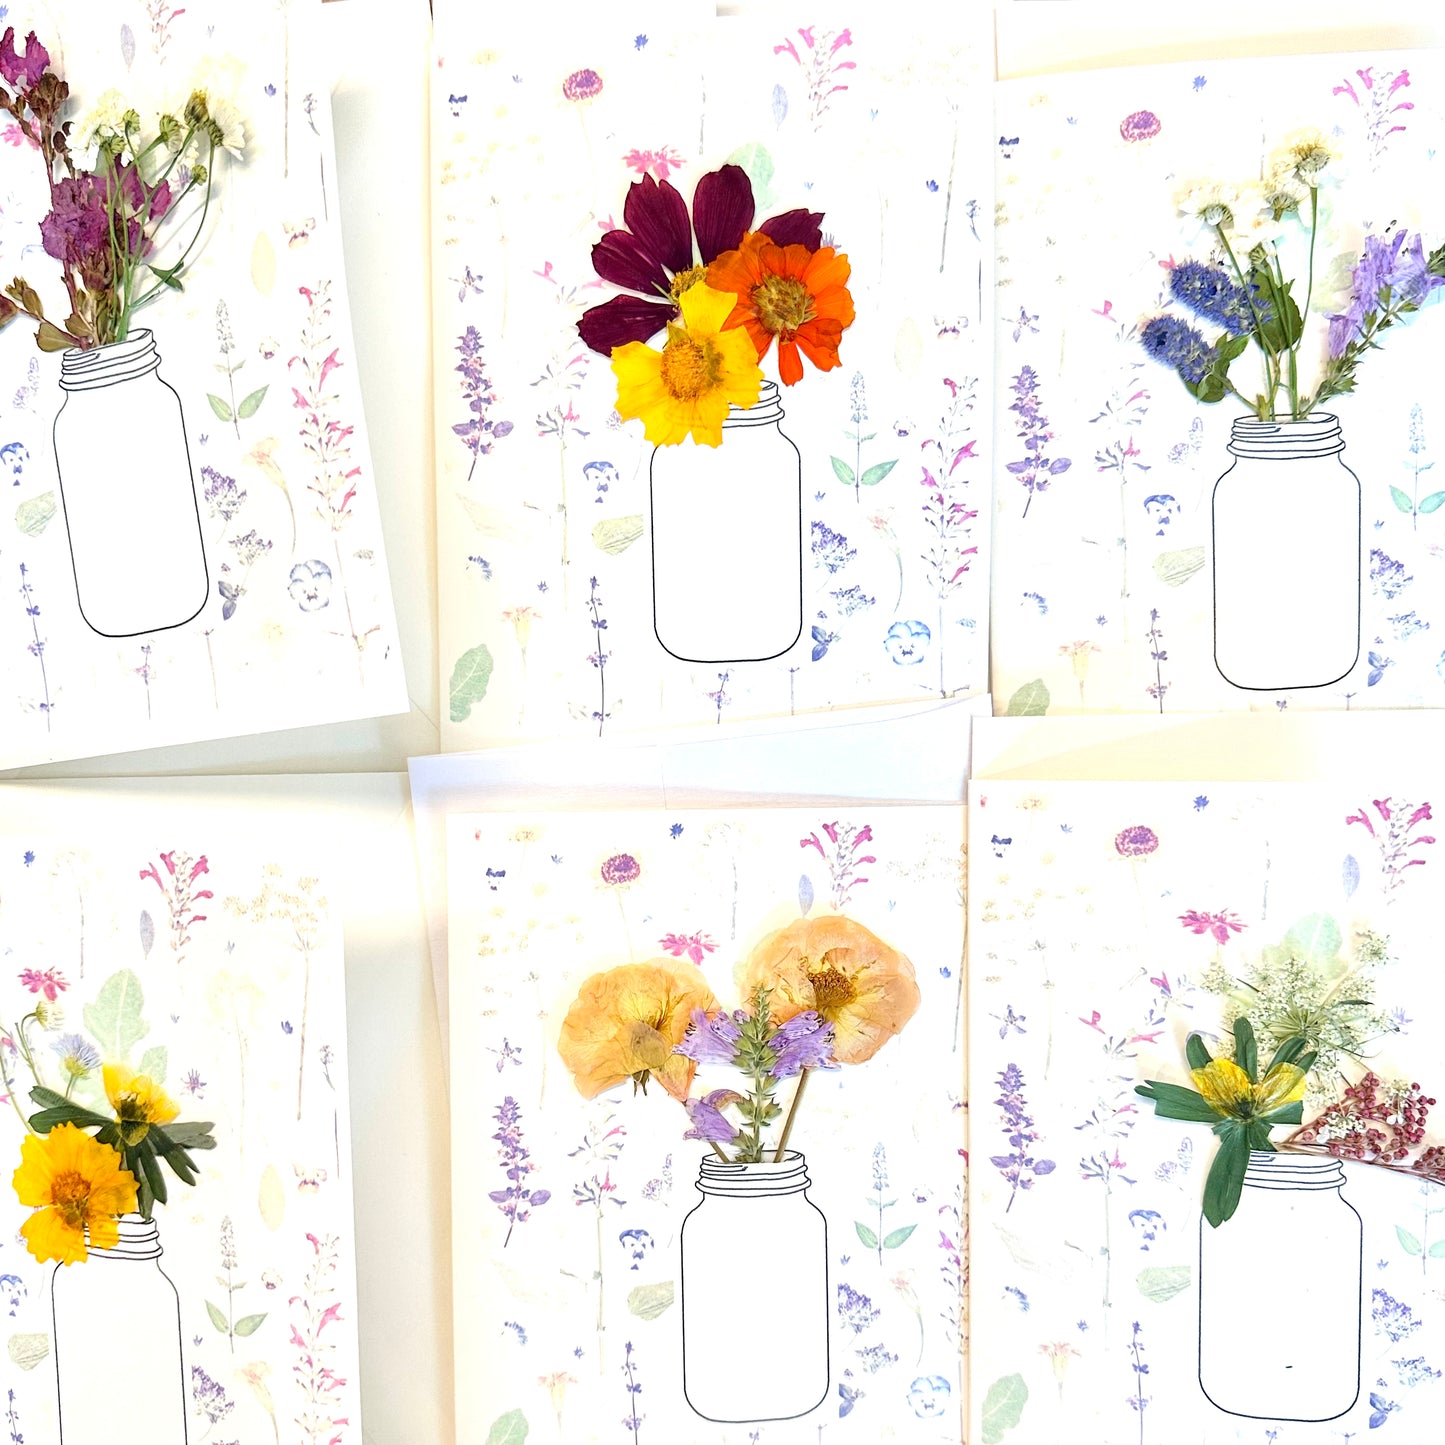 A Bouquet for You - Real Pressed Flowers Greeting Card